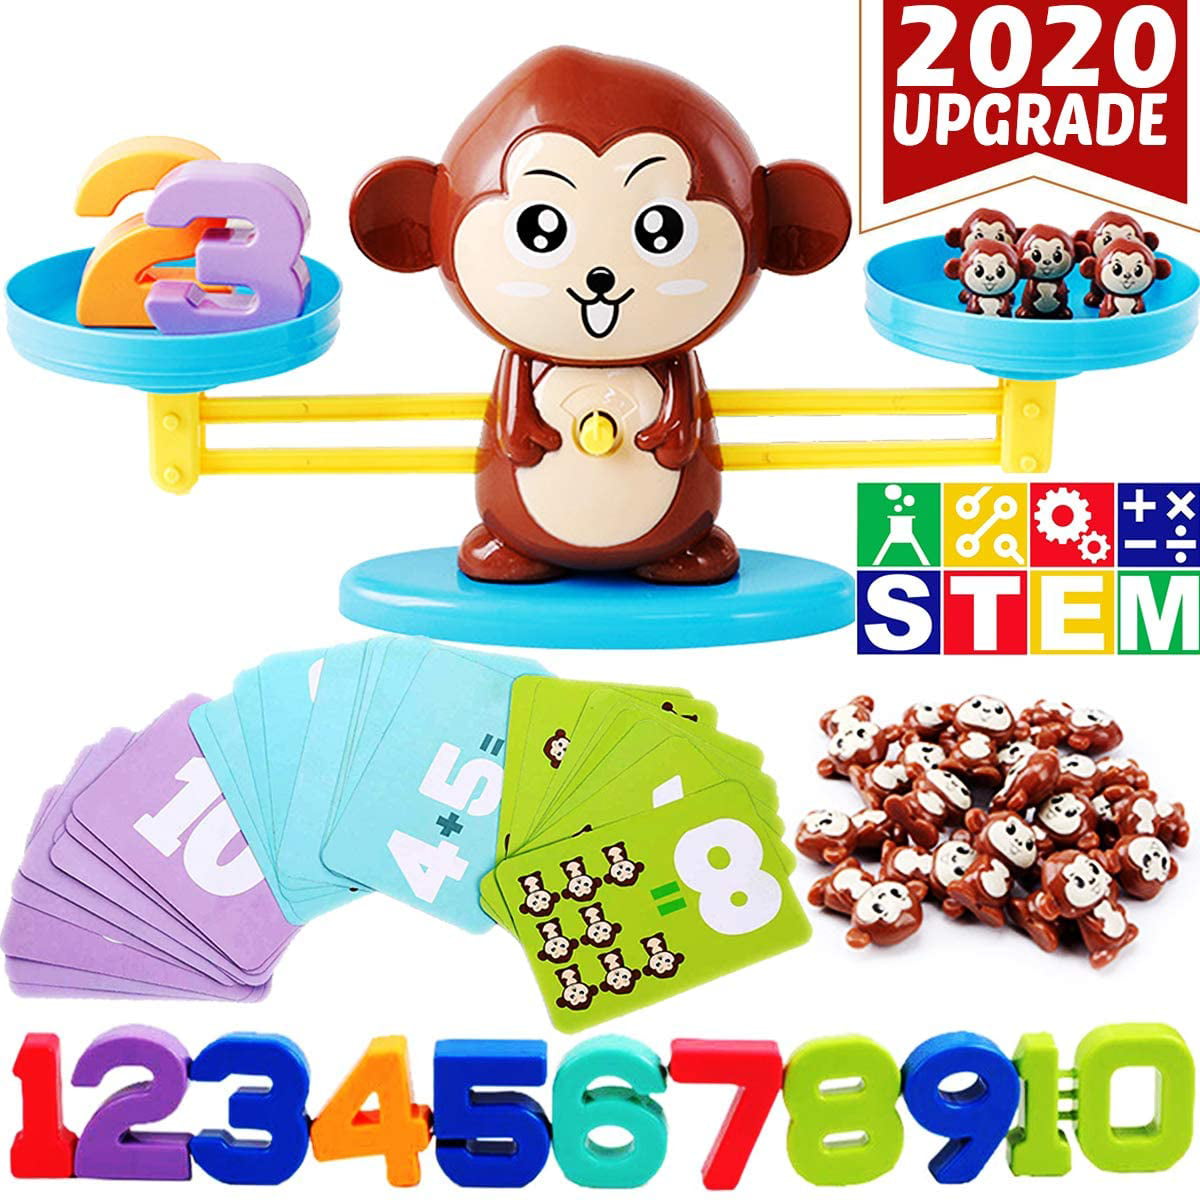 Educational Toy Gift for Kids HOT Monkey Balance Cool Math Game Fun Learning 